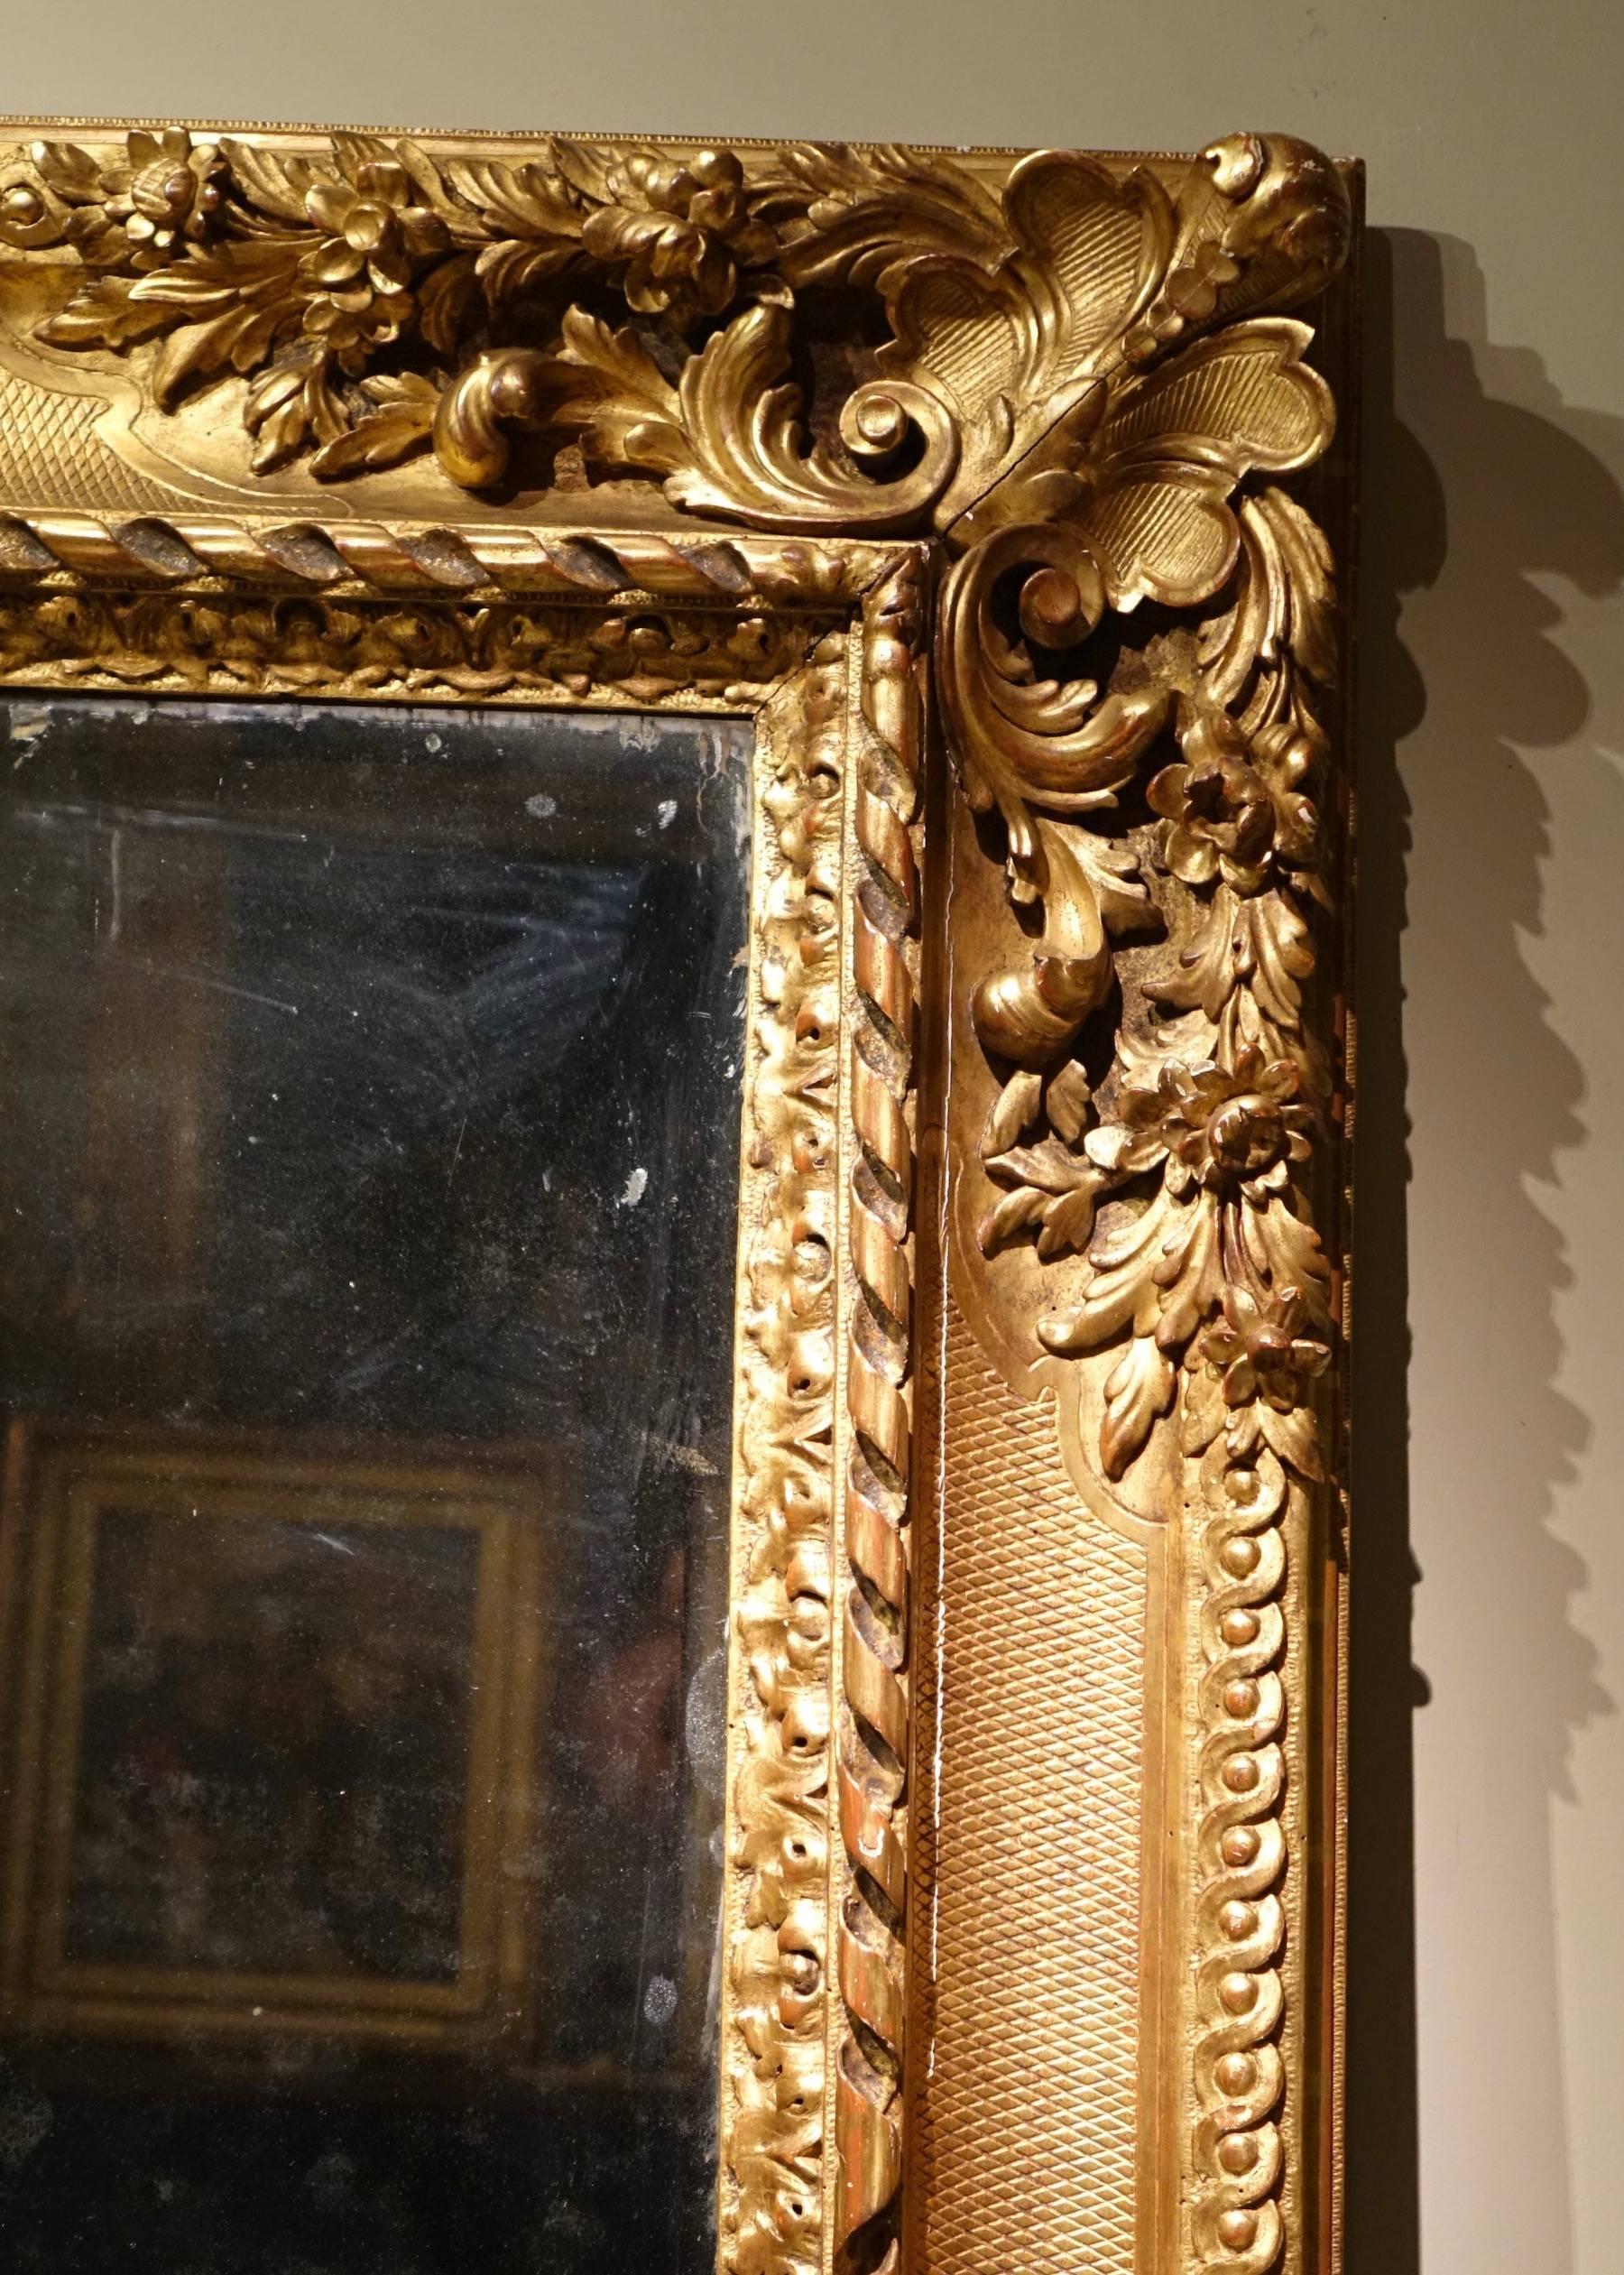 Large Louis XIV style mirror, France  circa 1850
Rectangular mirror richly decorated, with fishnet pattern, Louis XIV style, gilt wood (no stucco elements).
Mercury bevelled central glass.
Original parquetry wood back.
The mirror can be displayed